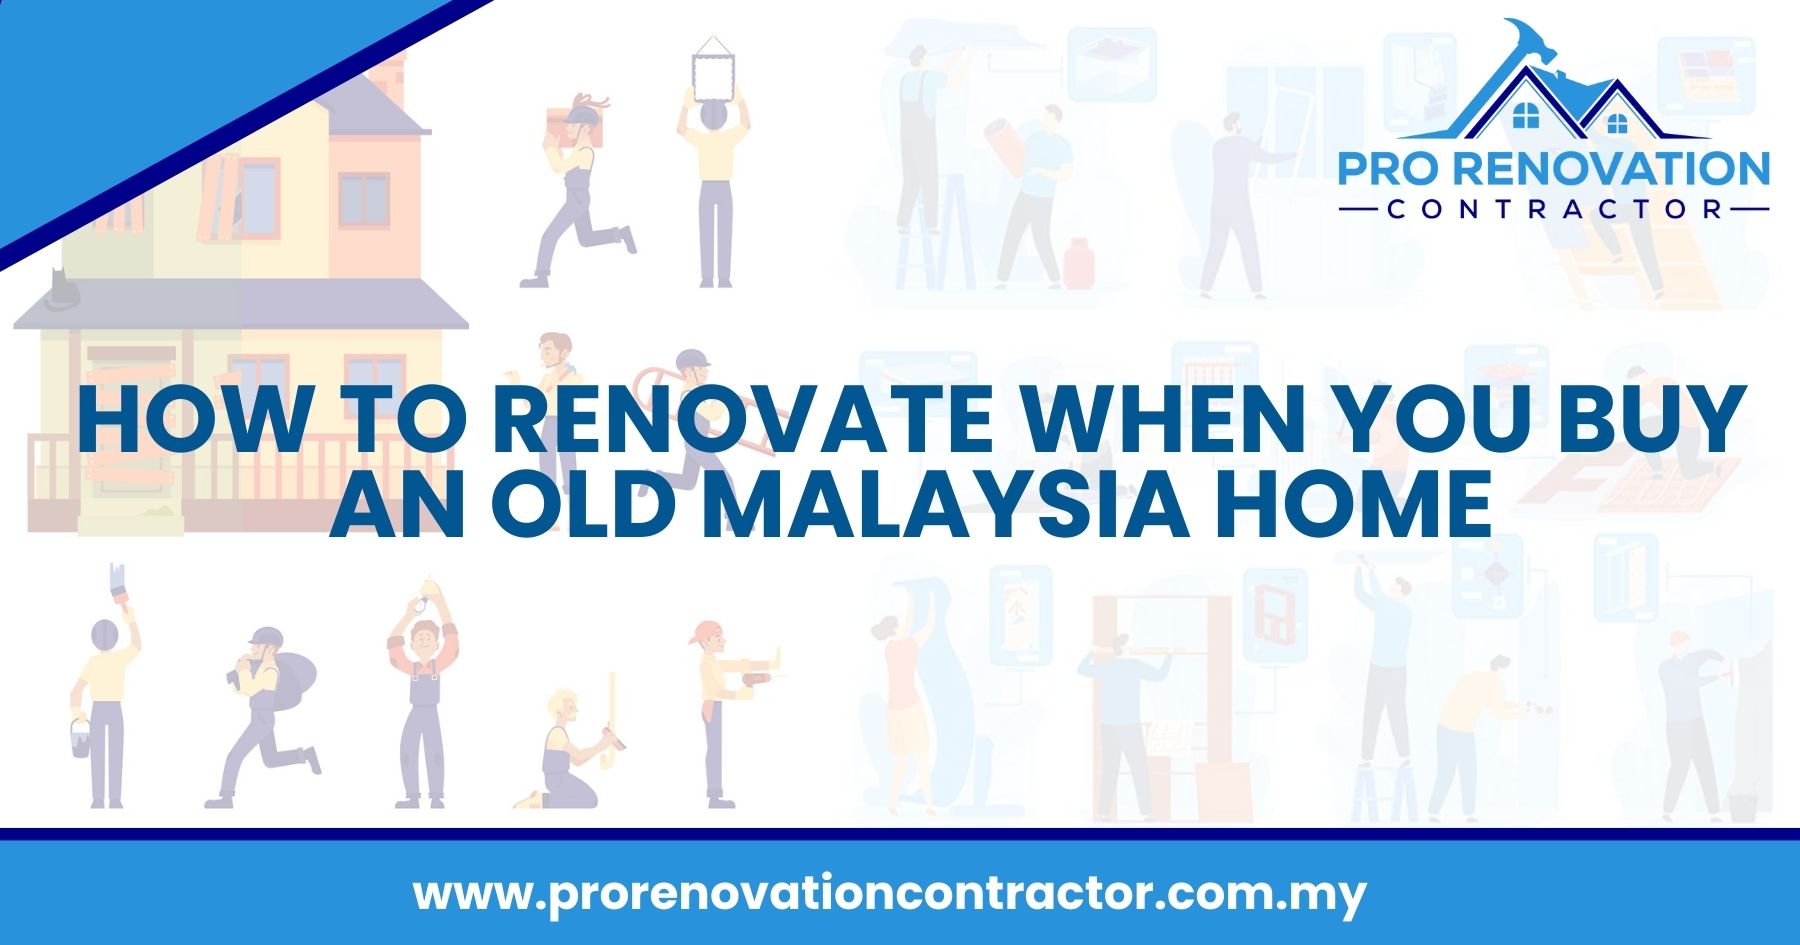 How to Renovate When You Buy an Old Malaysia Home